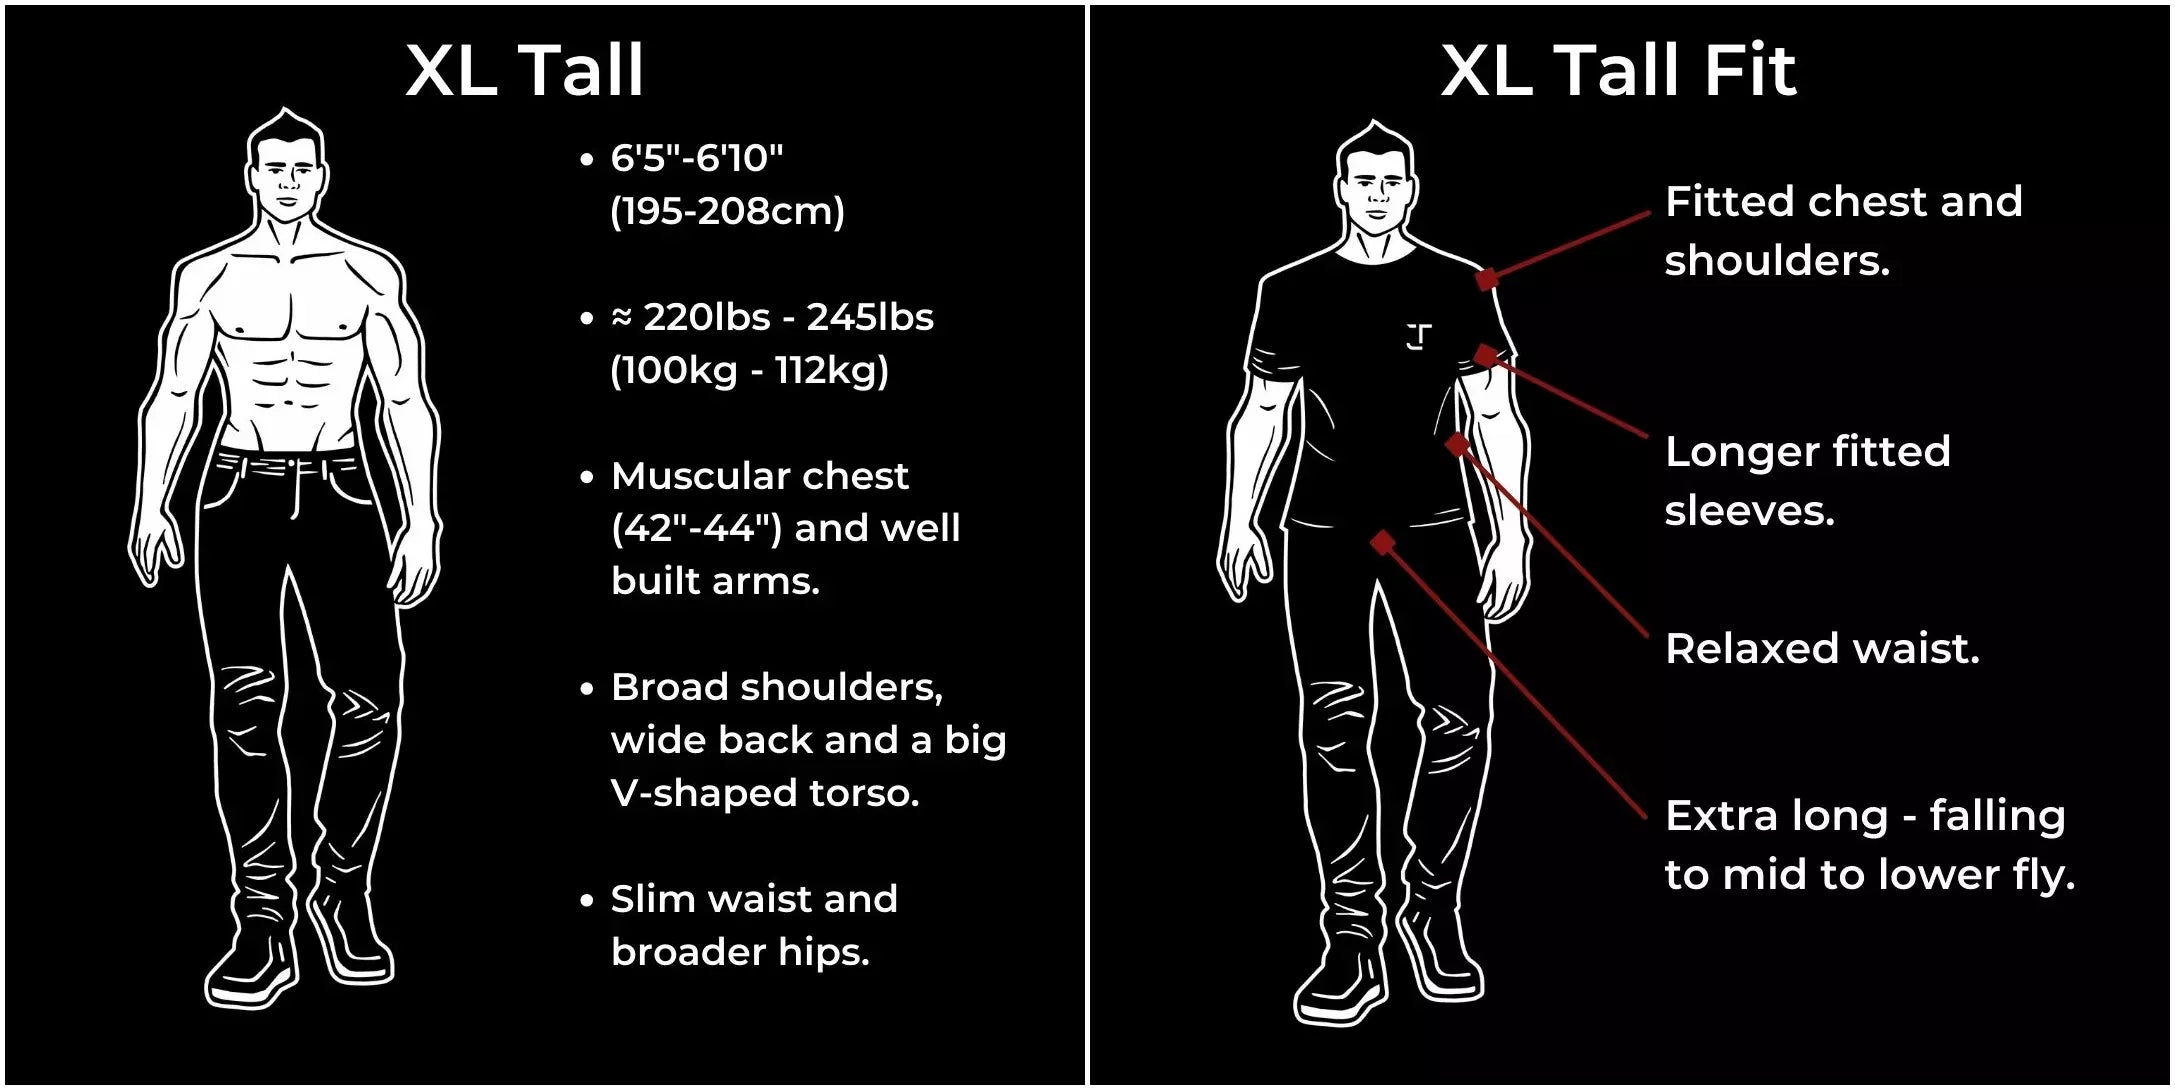 American Tall - Our clothing sizes fit tall men perfectly